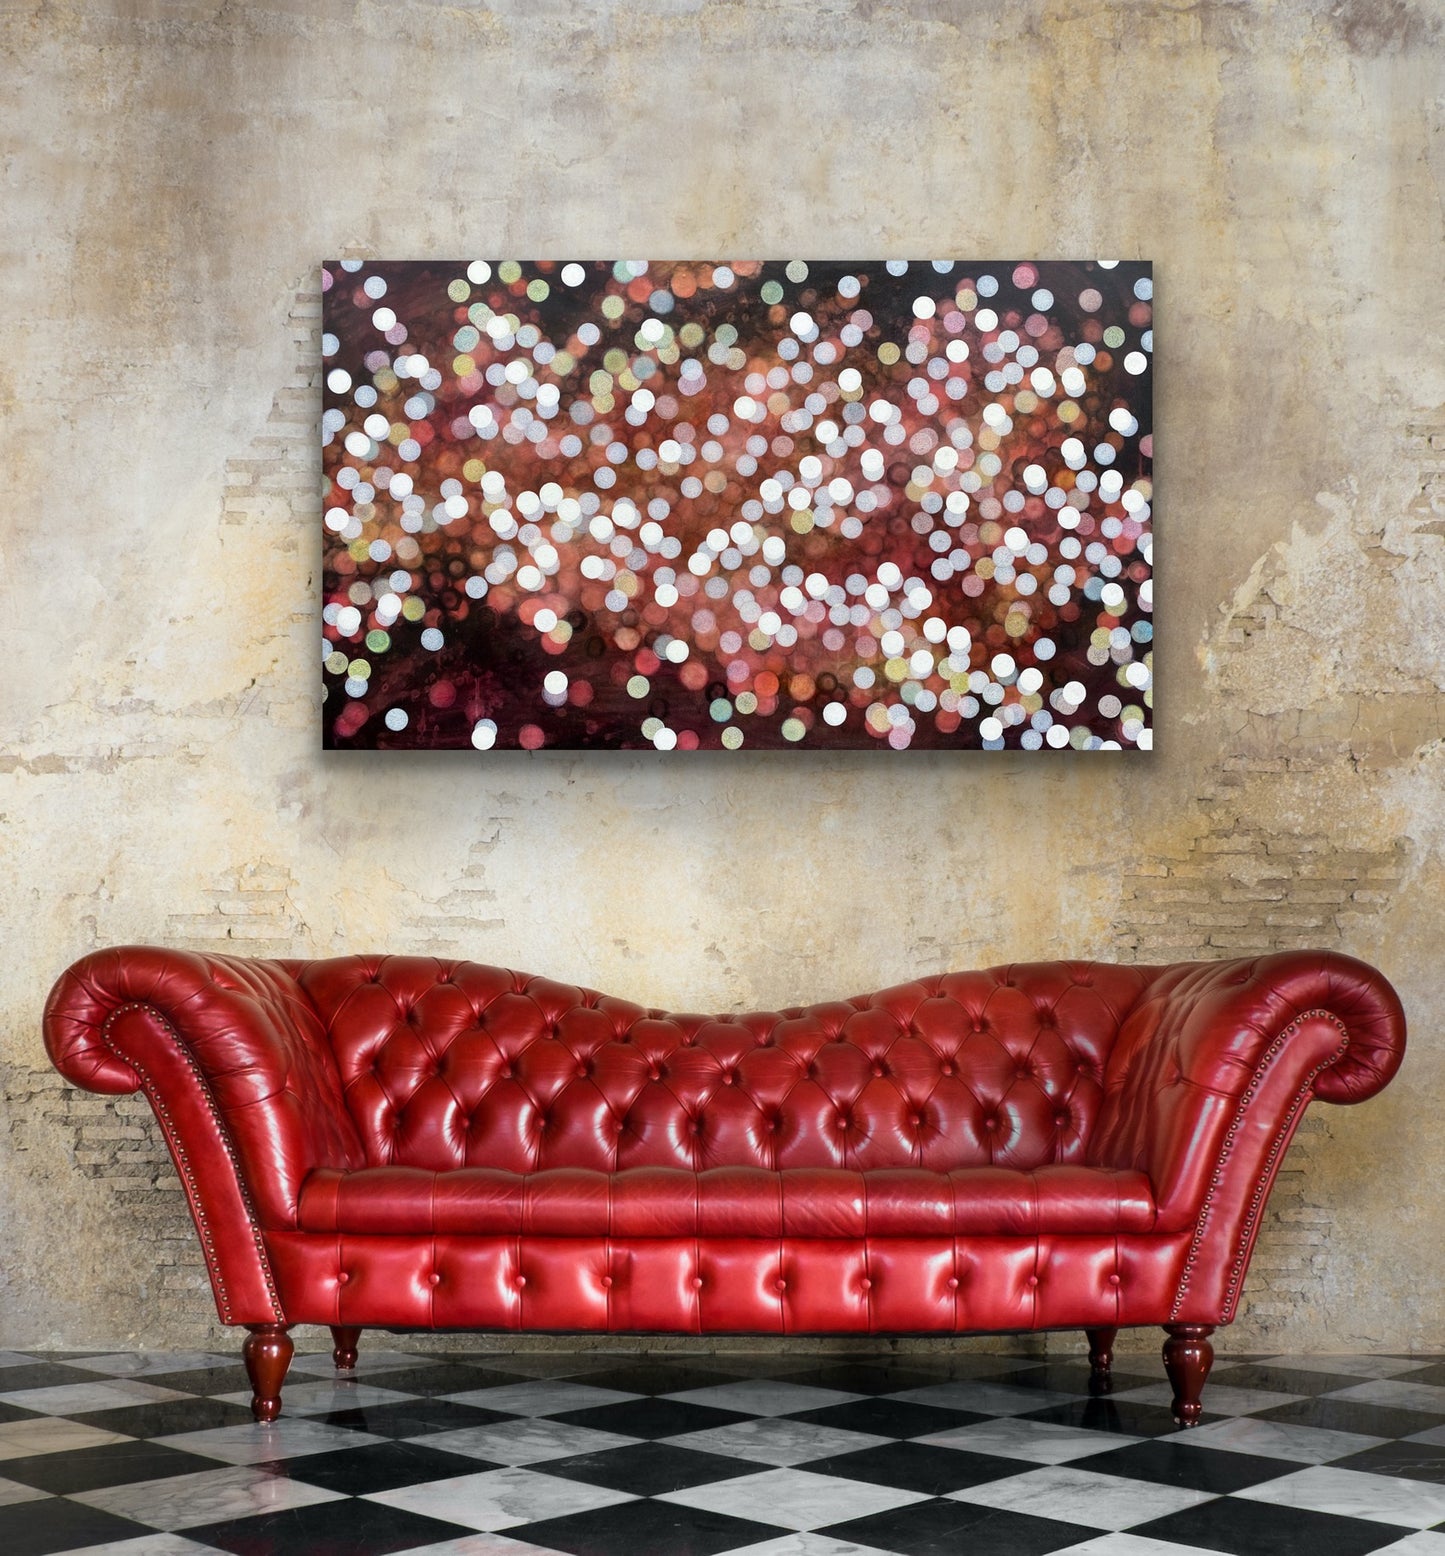 Bioluminescent Coral Bloom - Large Colourful Abstract Painting